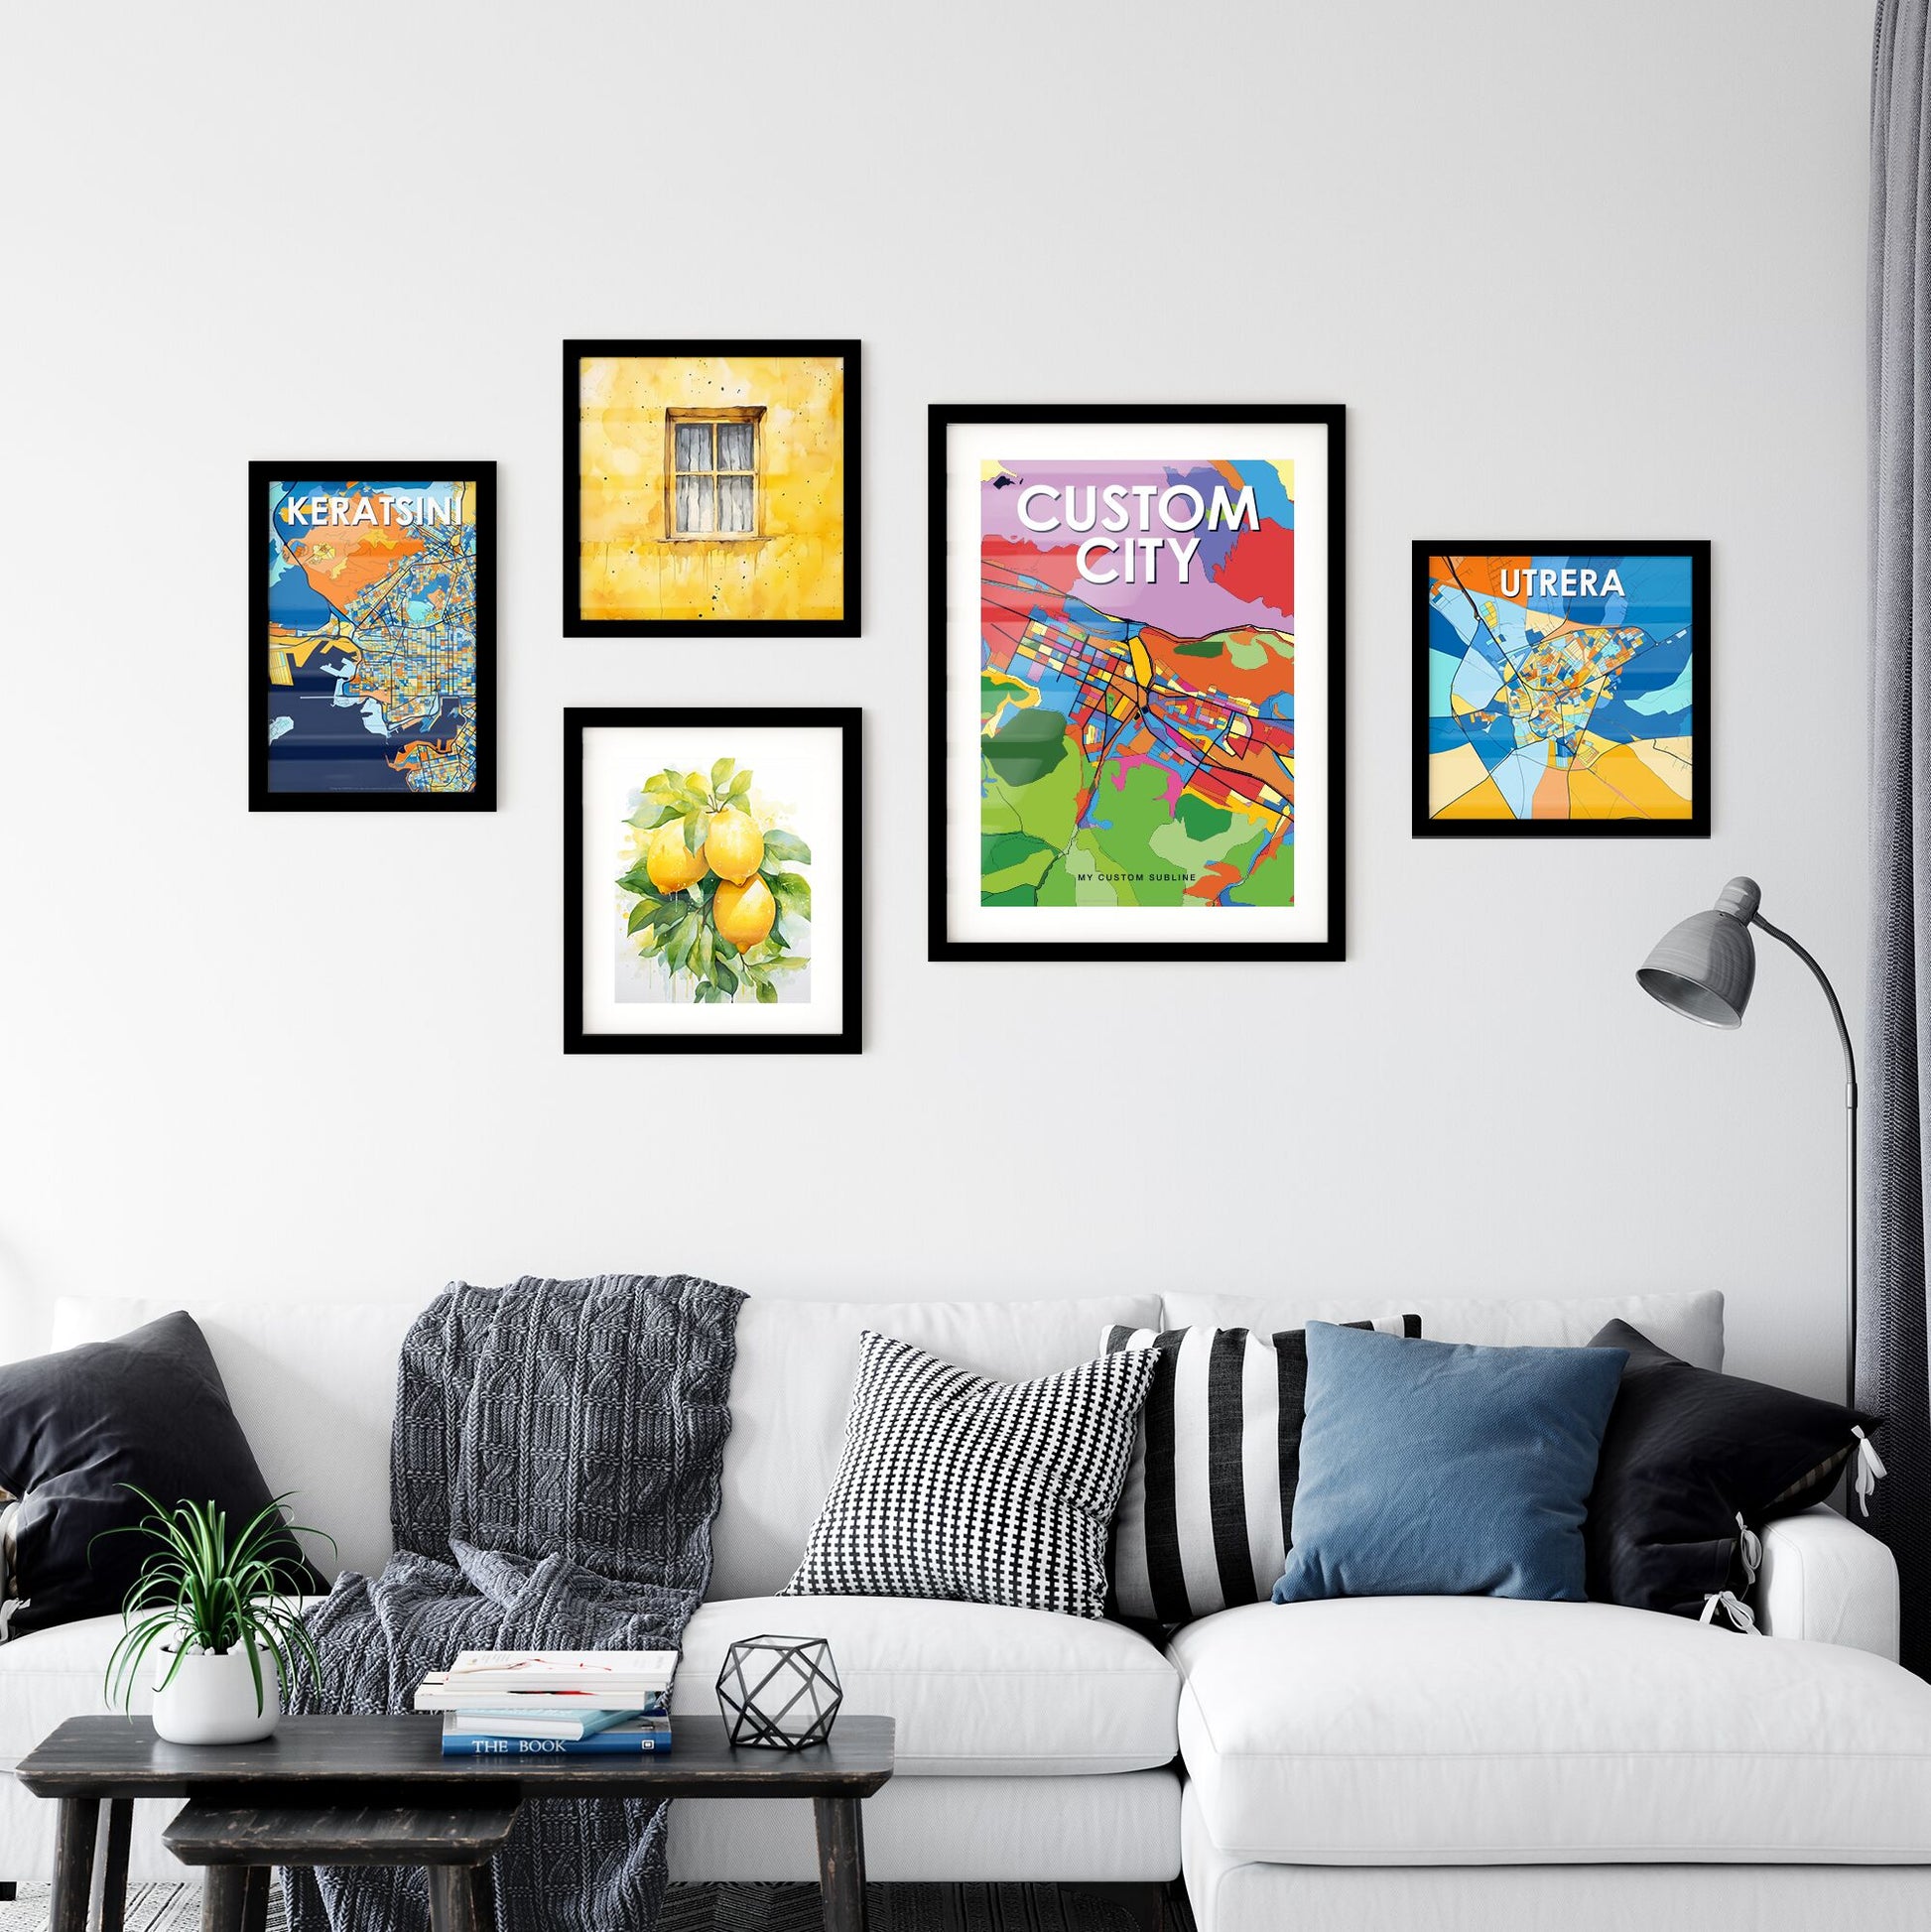 Custom VIBRANT CRAZY COLORFUL Map - Design your own map poster now!